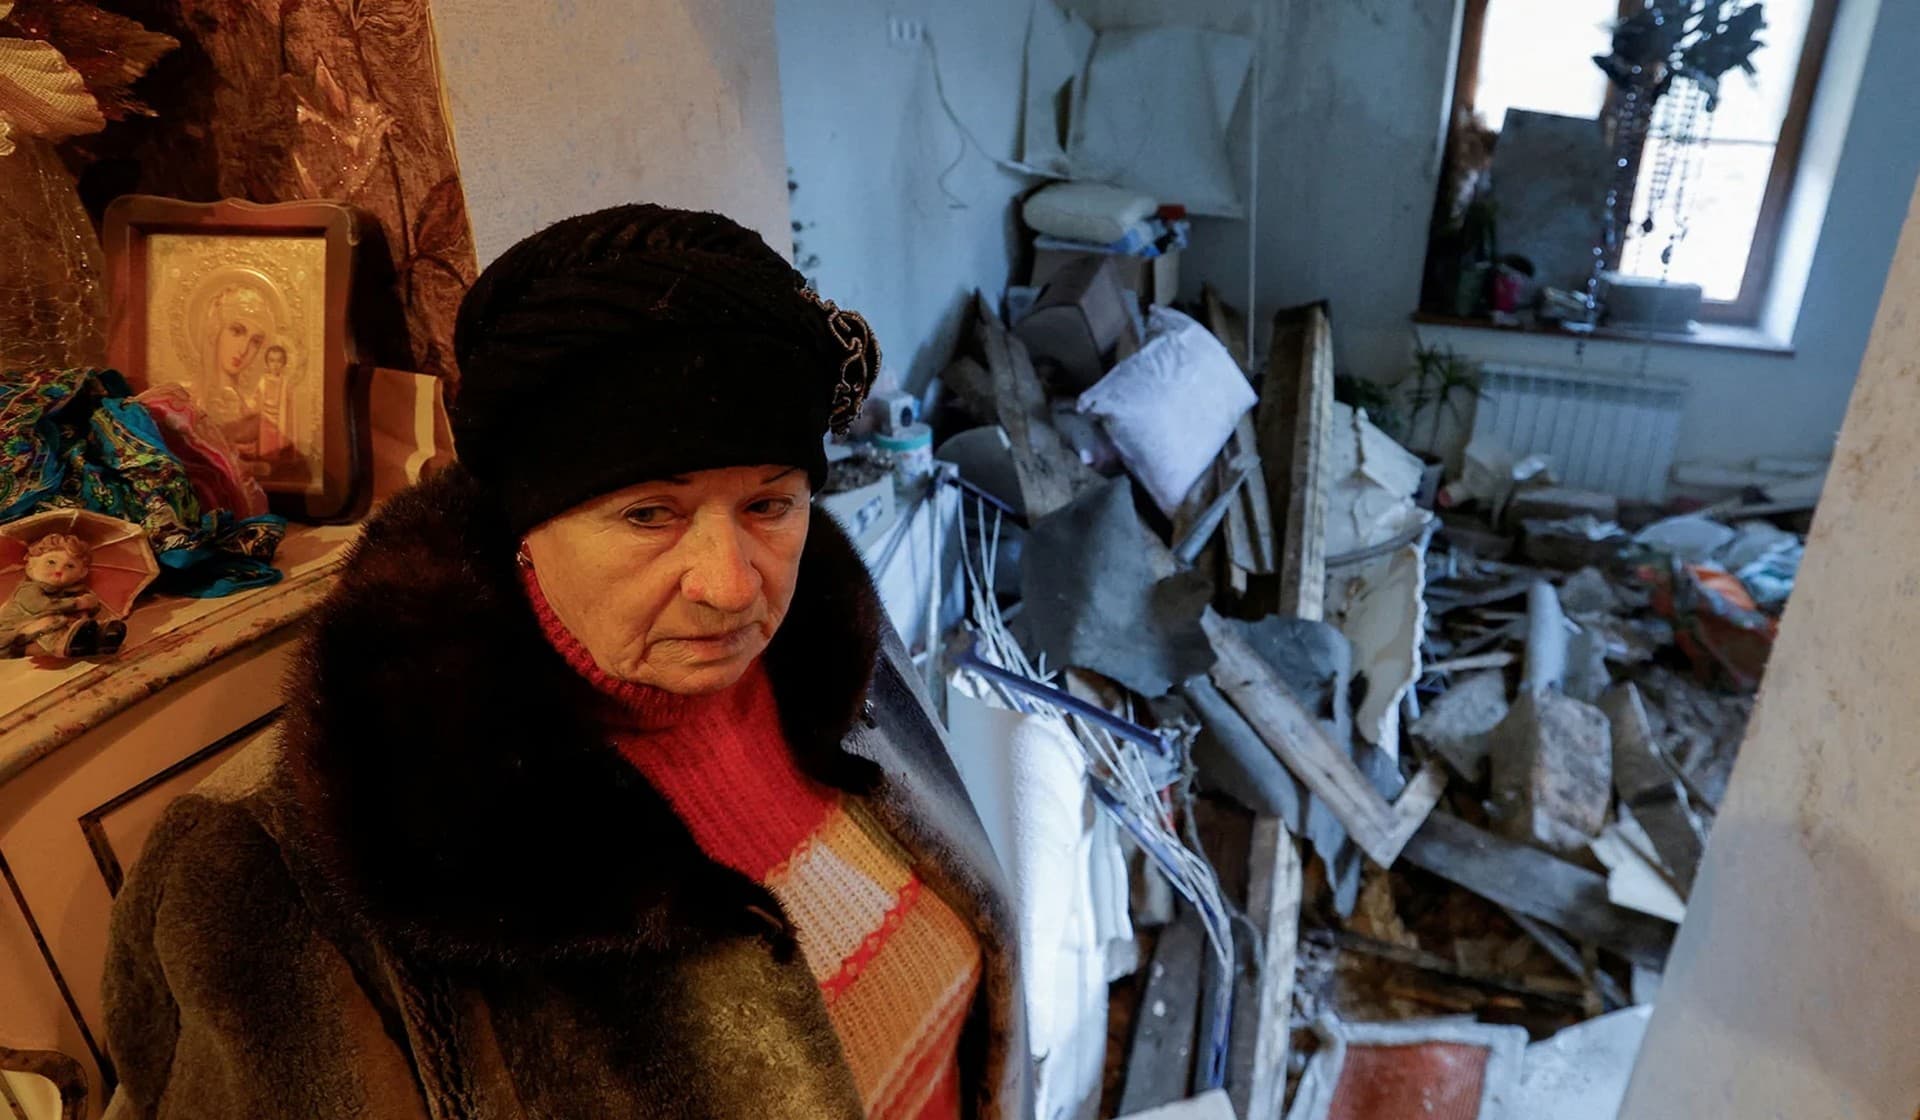 Local resident Lyudmila, 70, shows her apartment inside a house heavily damaged in recent shelling in Donetsk